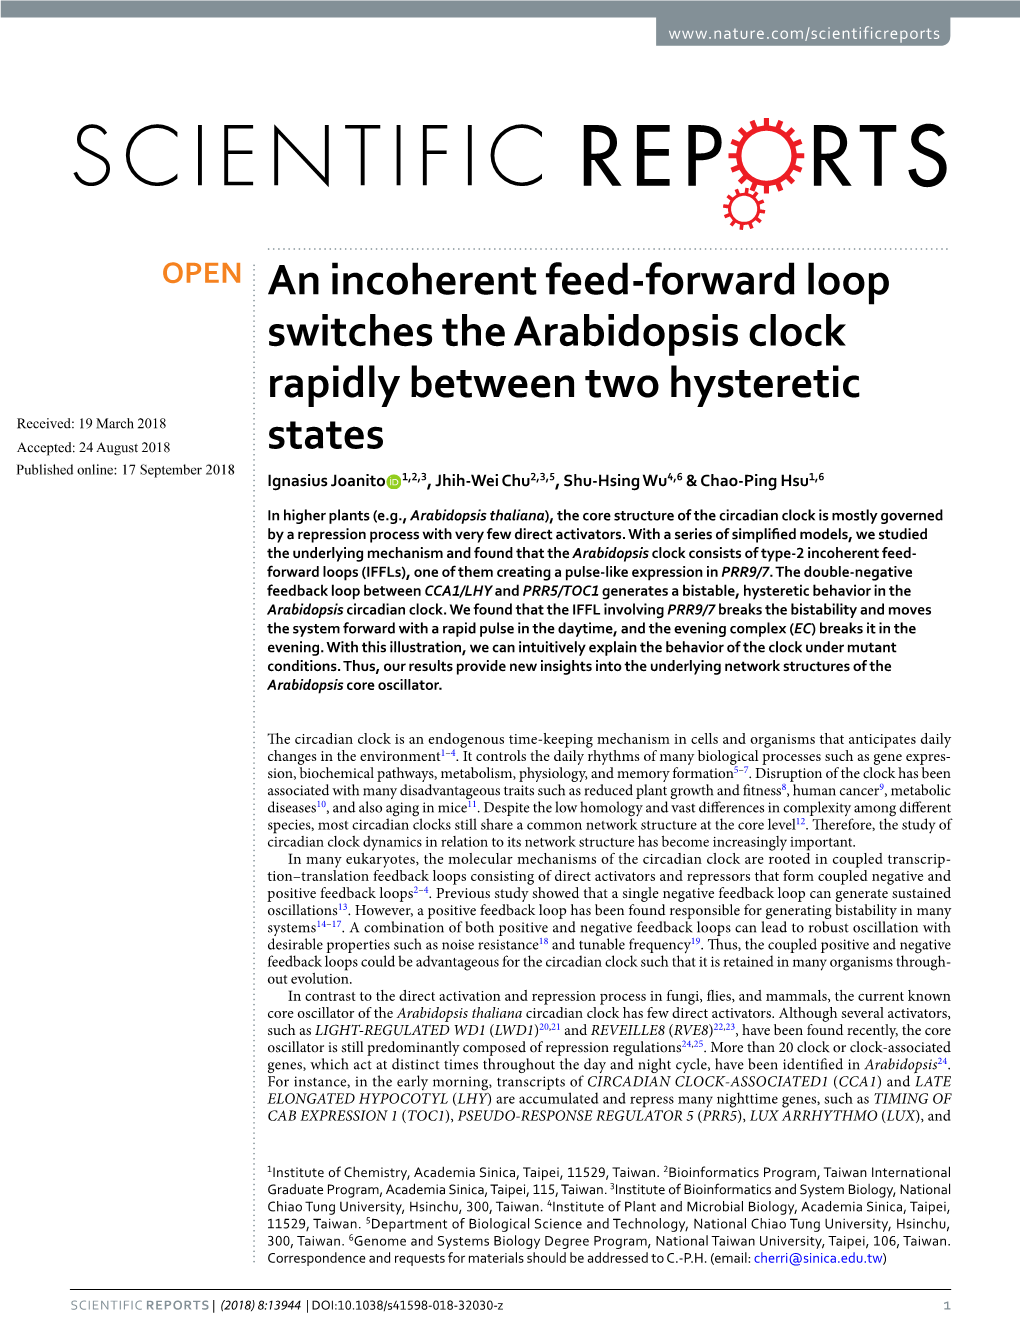 An Incoherent Feed-Forward Loop Switches the Arabidopsis Clock